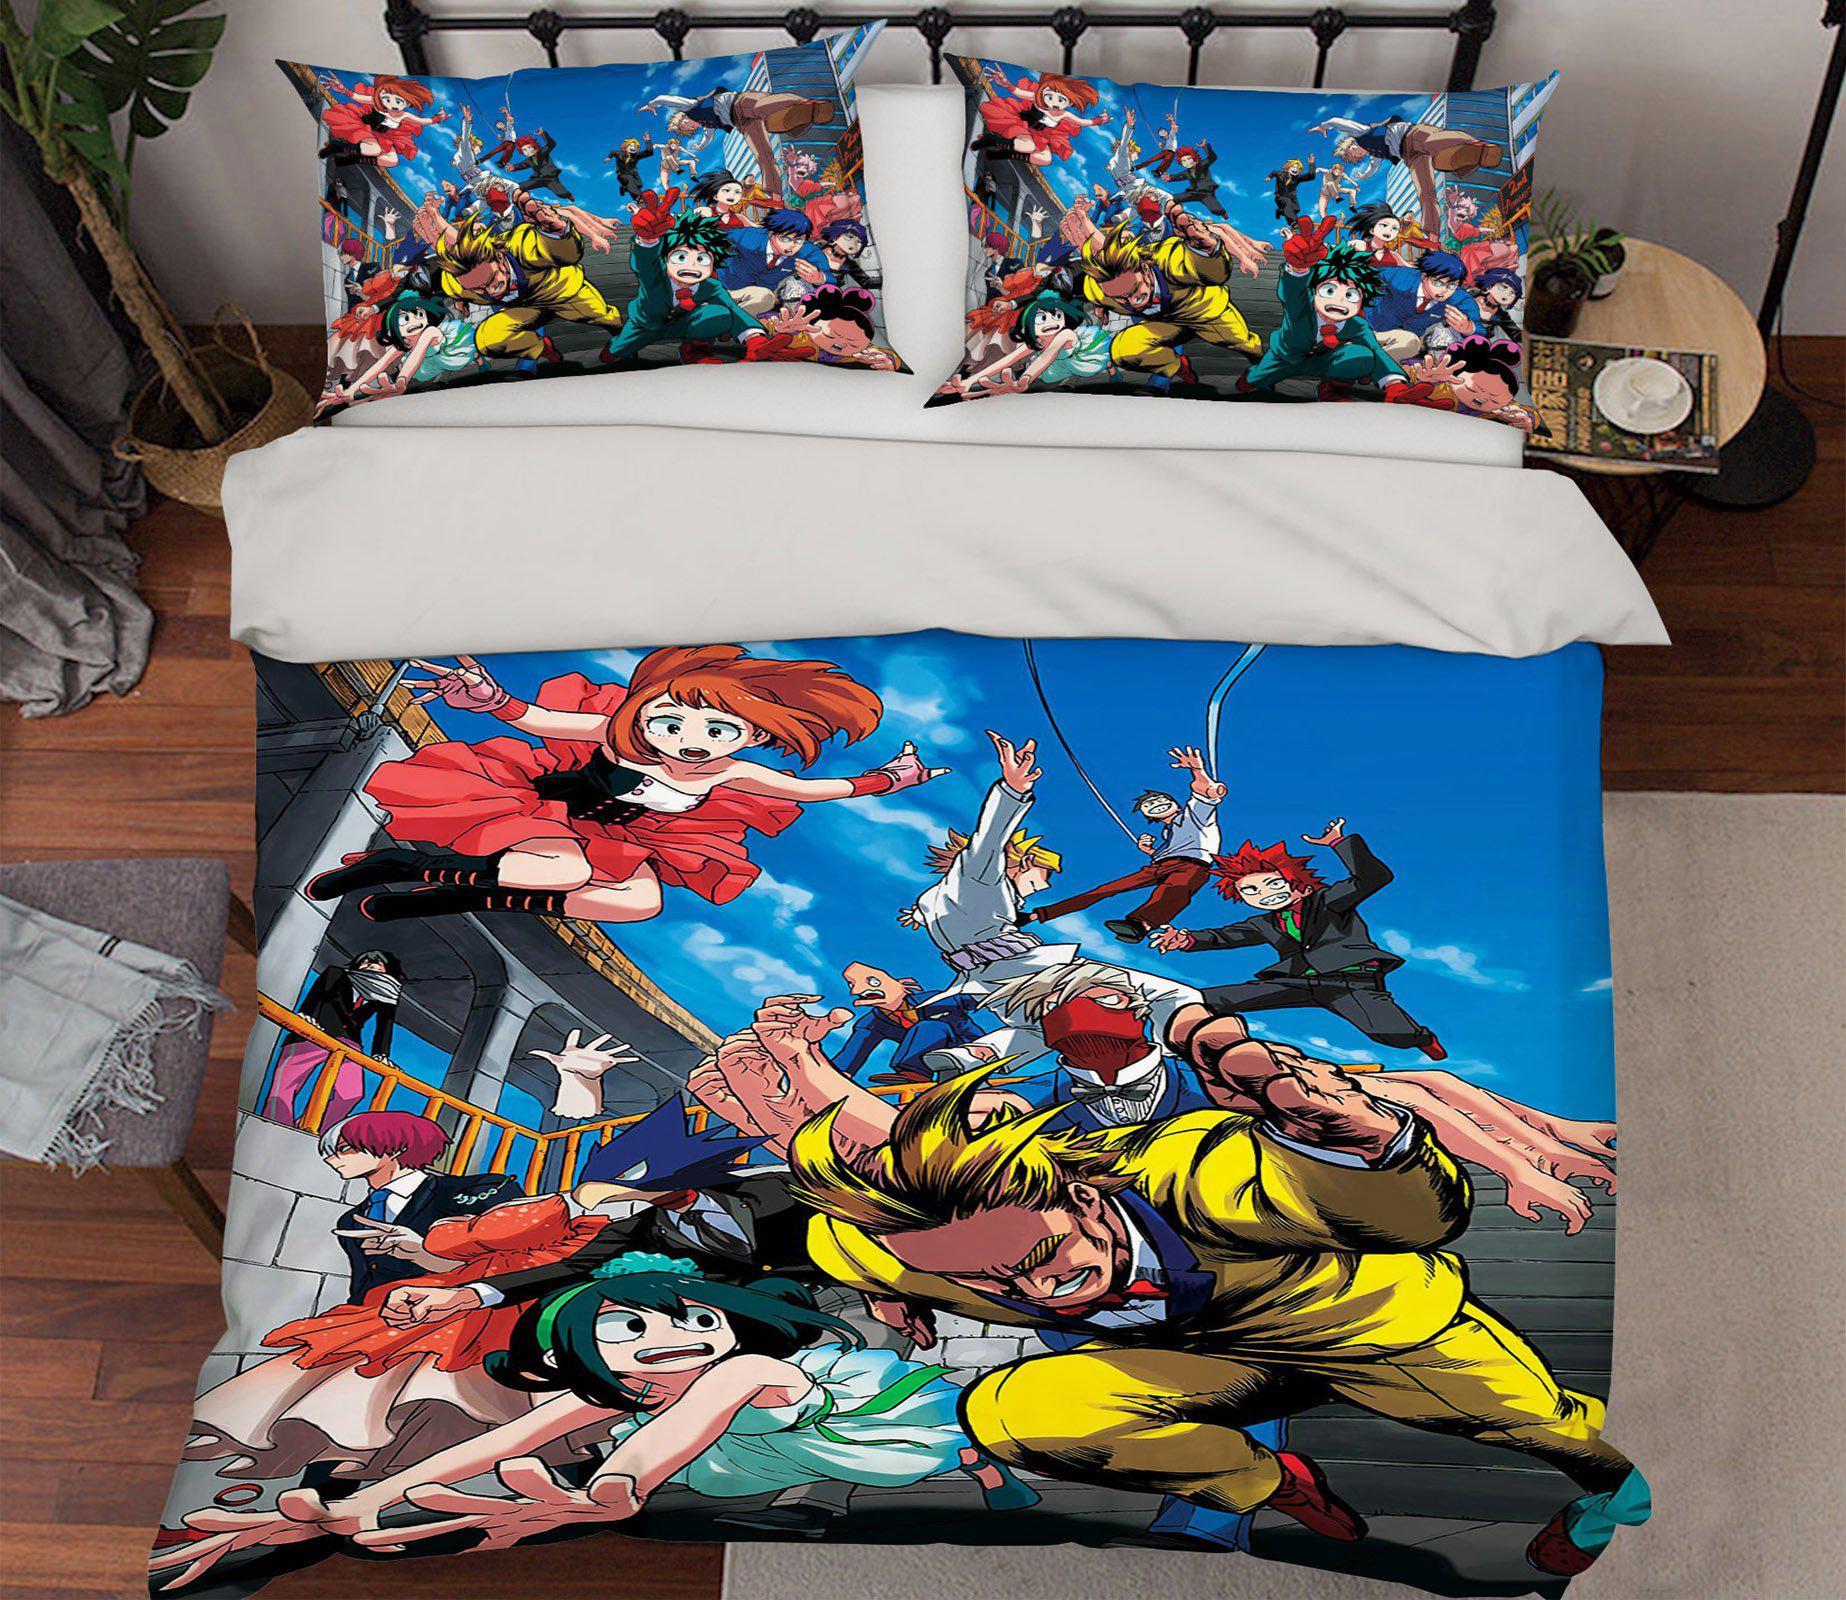 3D Bed Pillowcases Quilt My Hero Academia 21066 Anime Quilt Cover Set Bedding Set Pillowcases 3D Bed Pillowcases Quilt Duvet cover